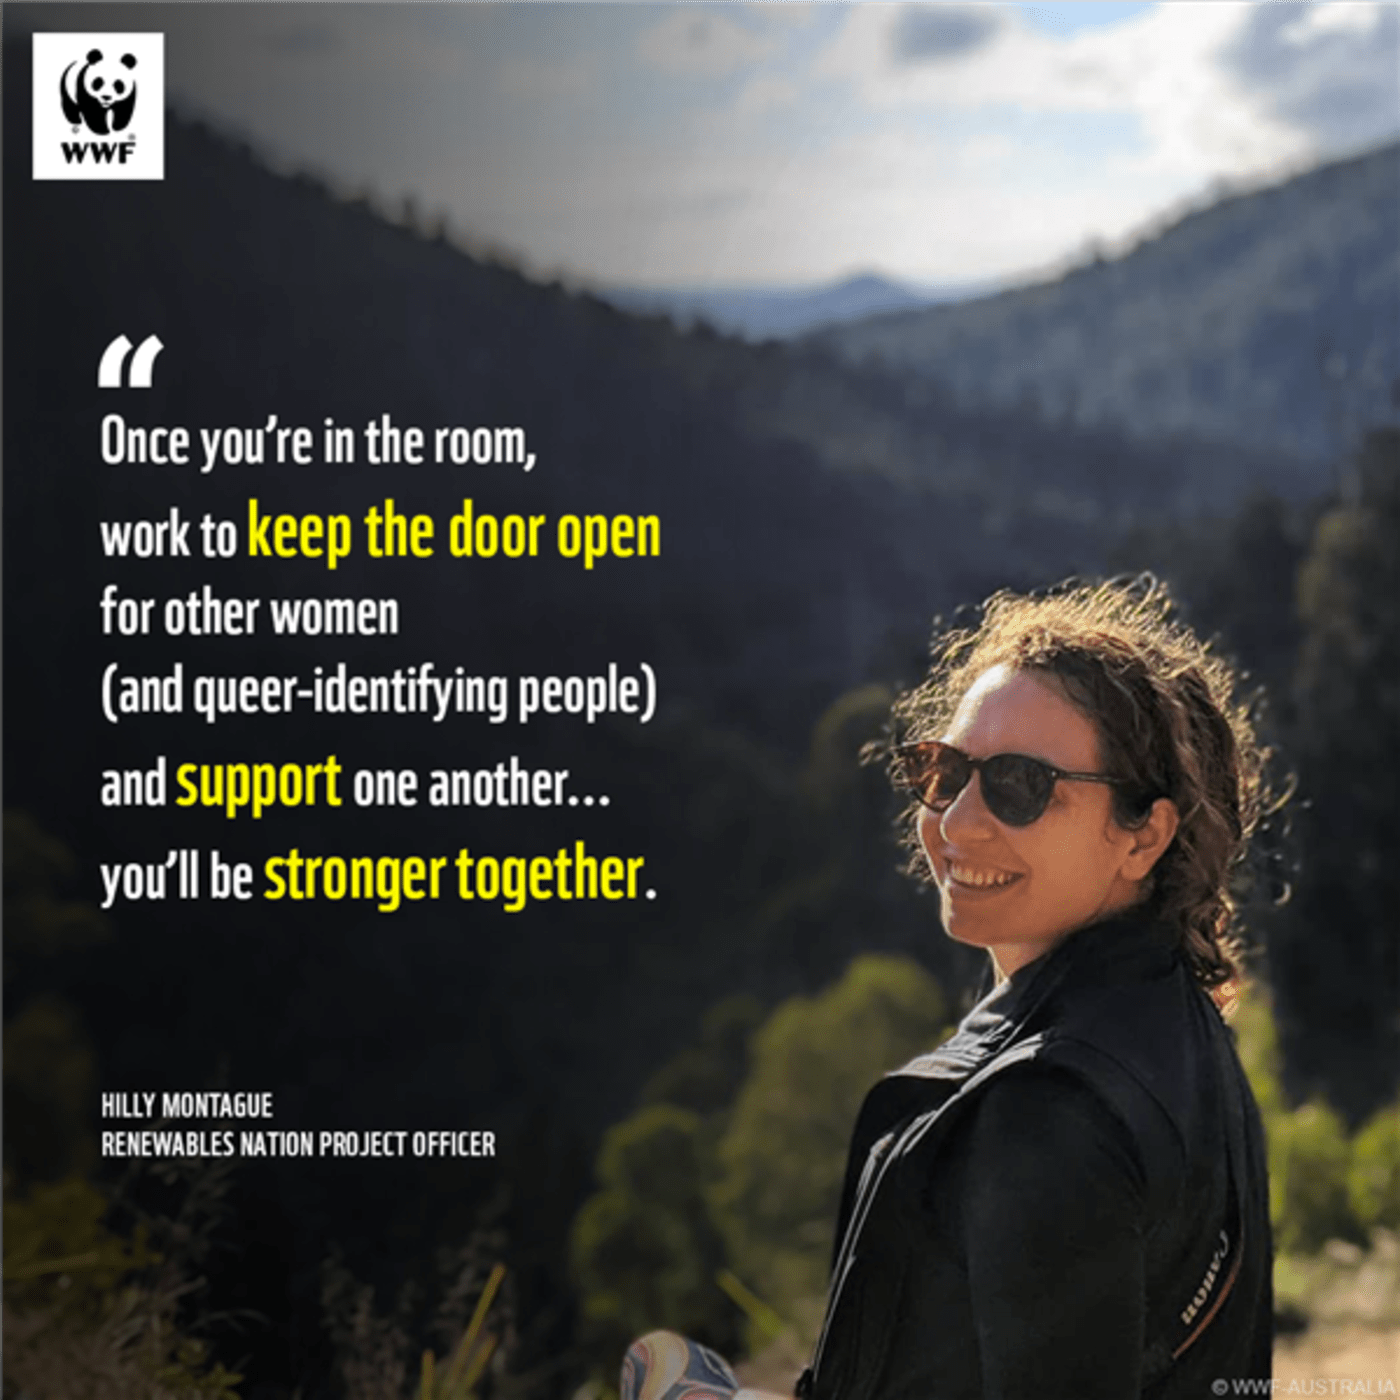 Hillary Montague is a climate justice advocate who works for WWF-Australia on the Renewables Nation campaign